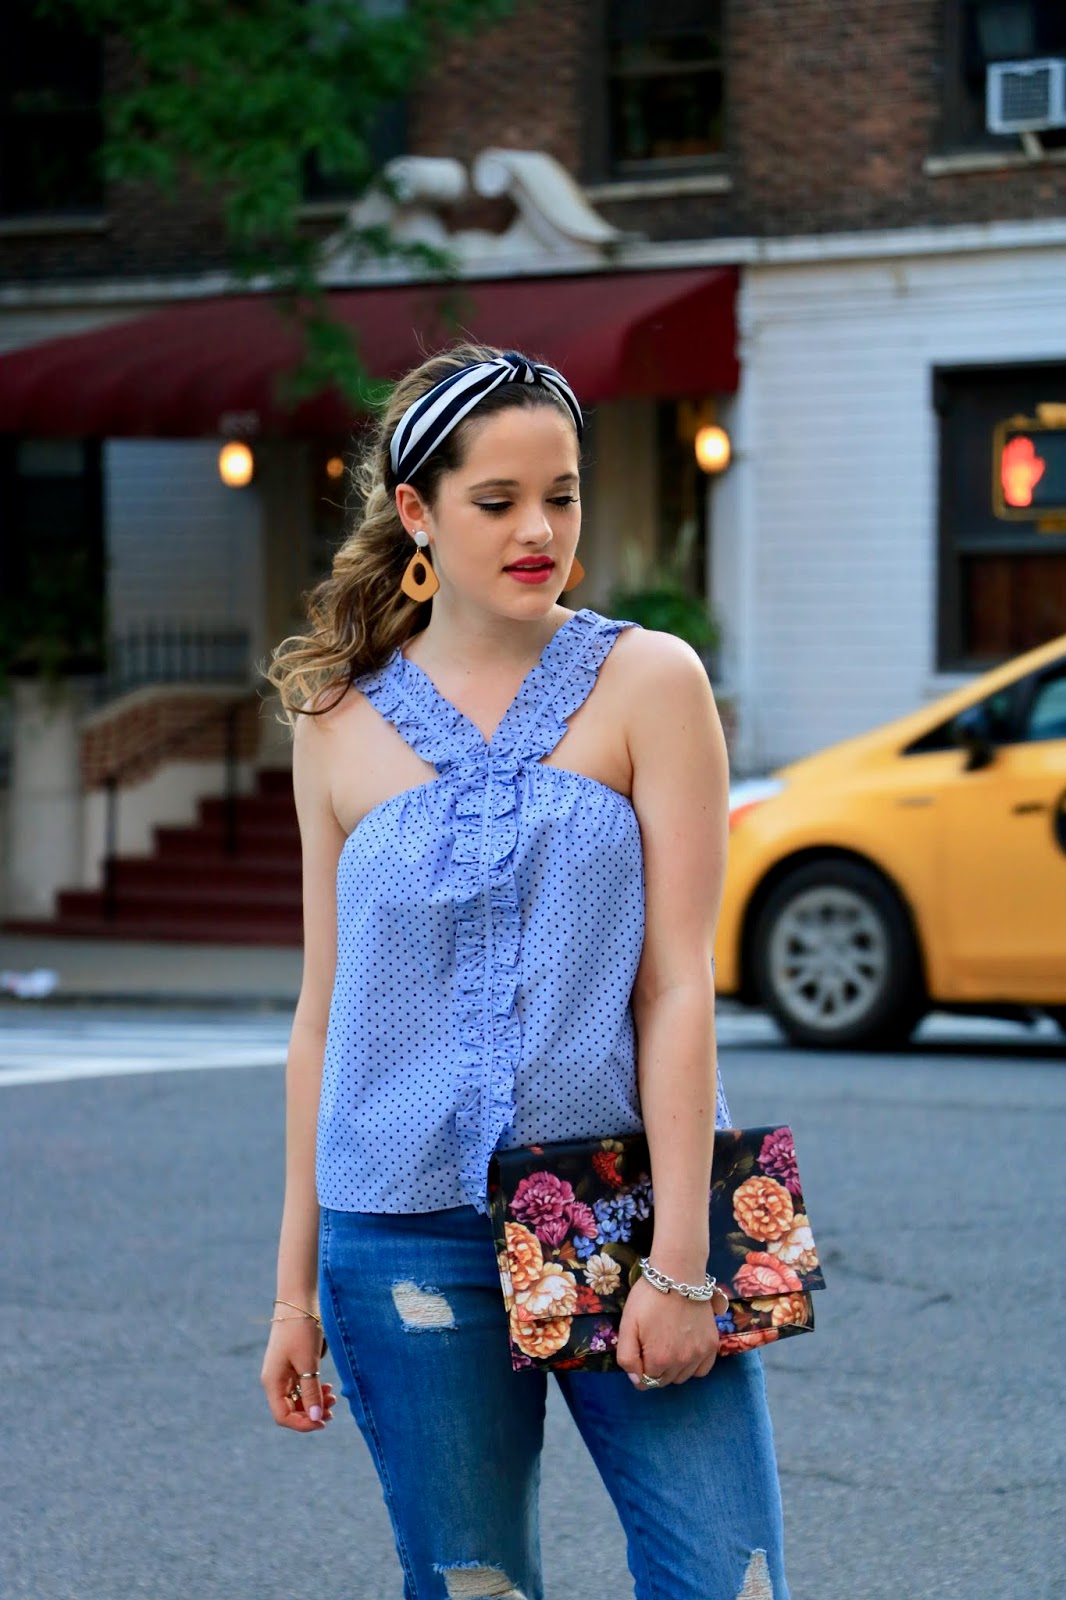 Fashion blogger Kathleen Harper wearing a spring outfit in New York City.